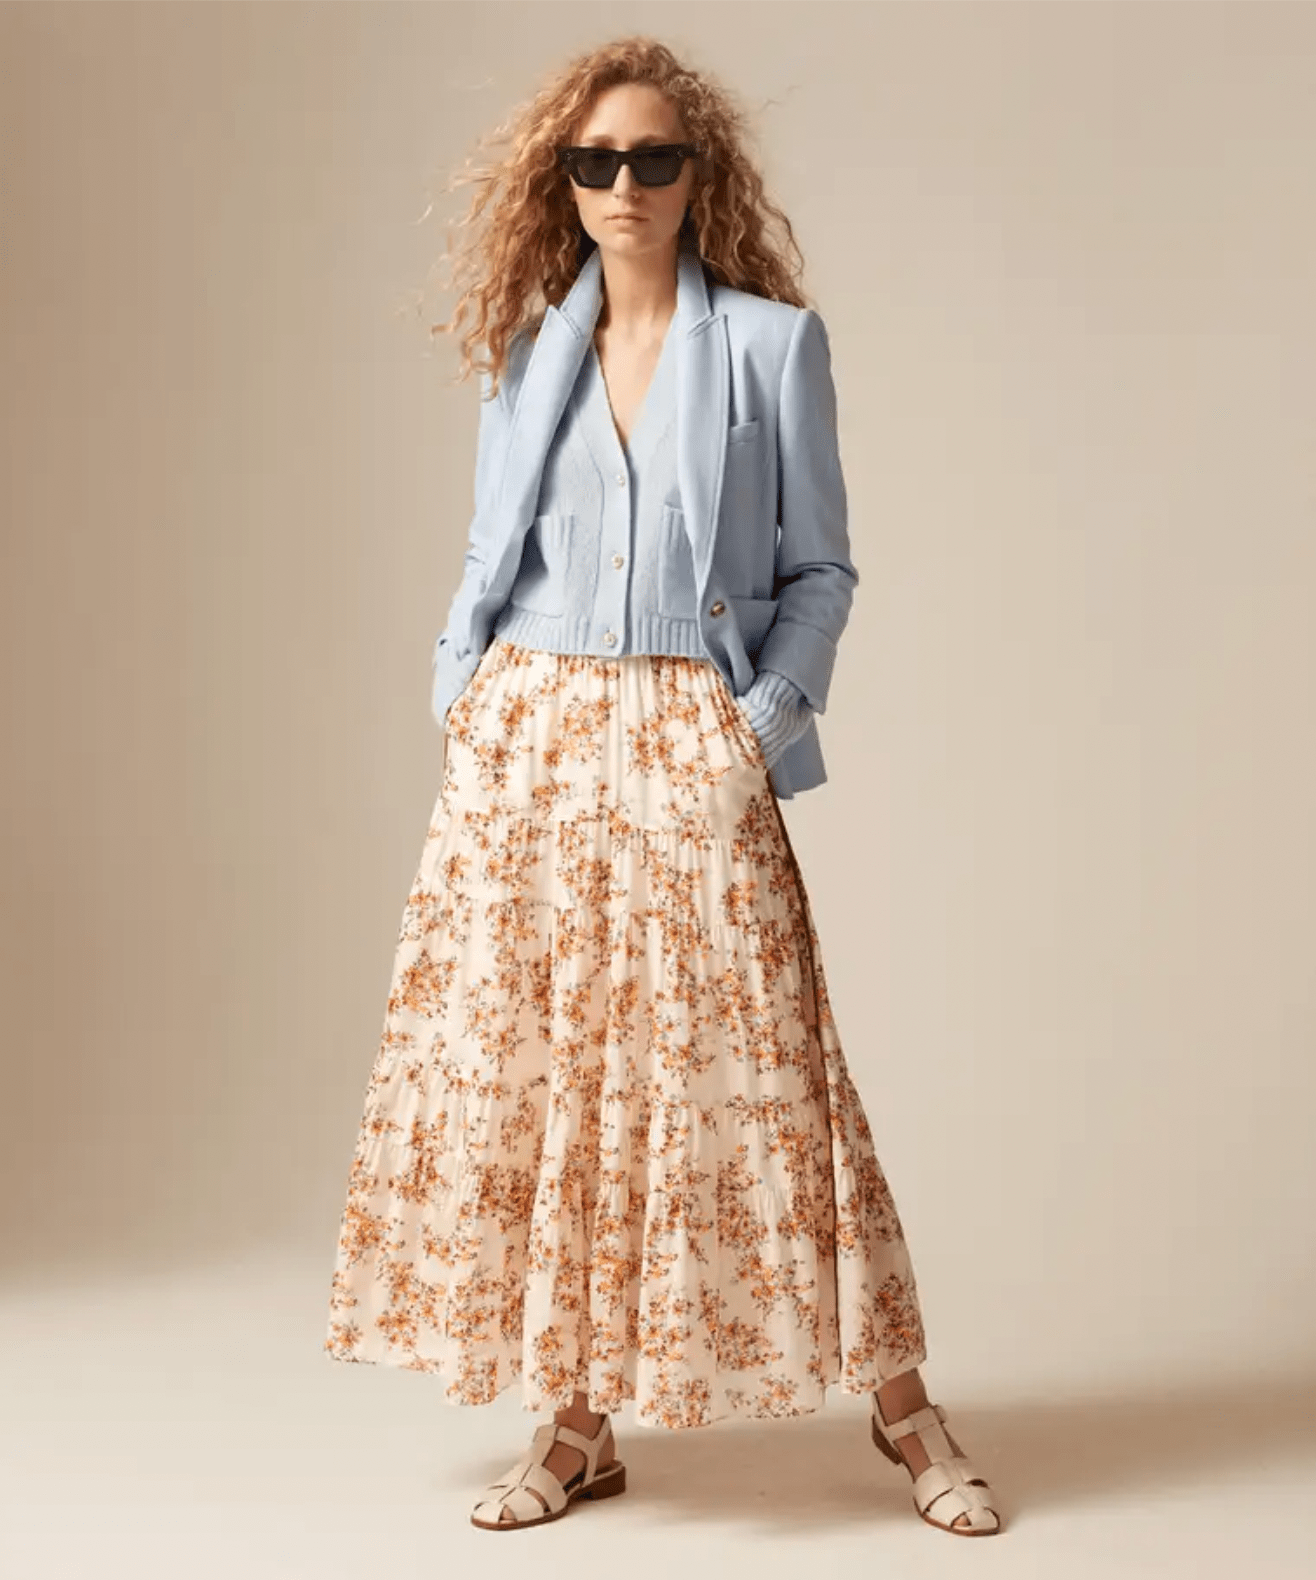 The long maxi skirts are fashionable to wear in summer and they can also  prevent you from the harmful sun rays. Whenever you wea…